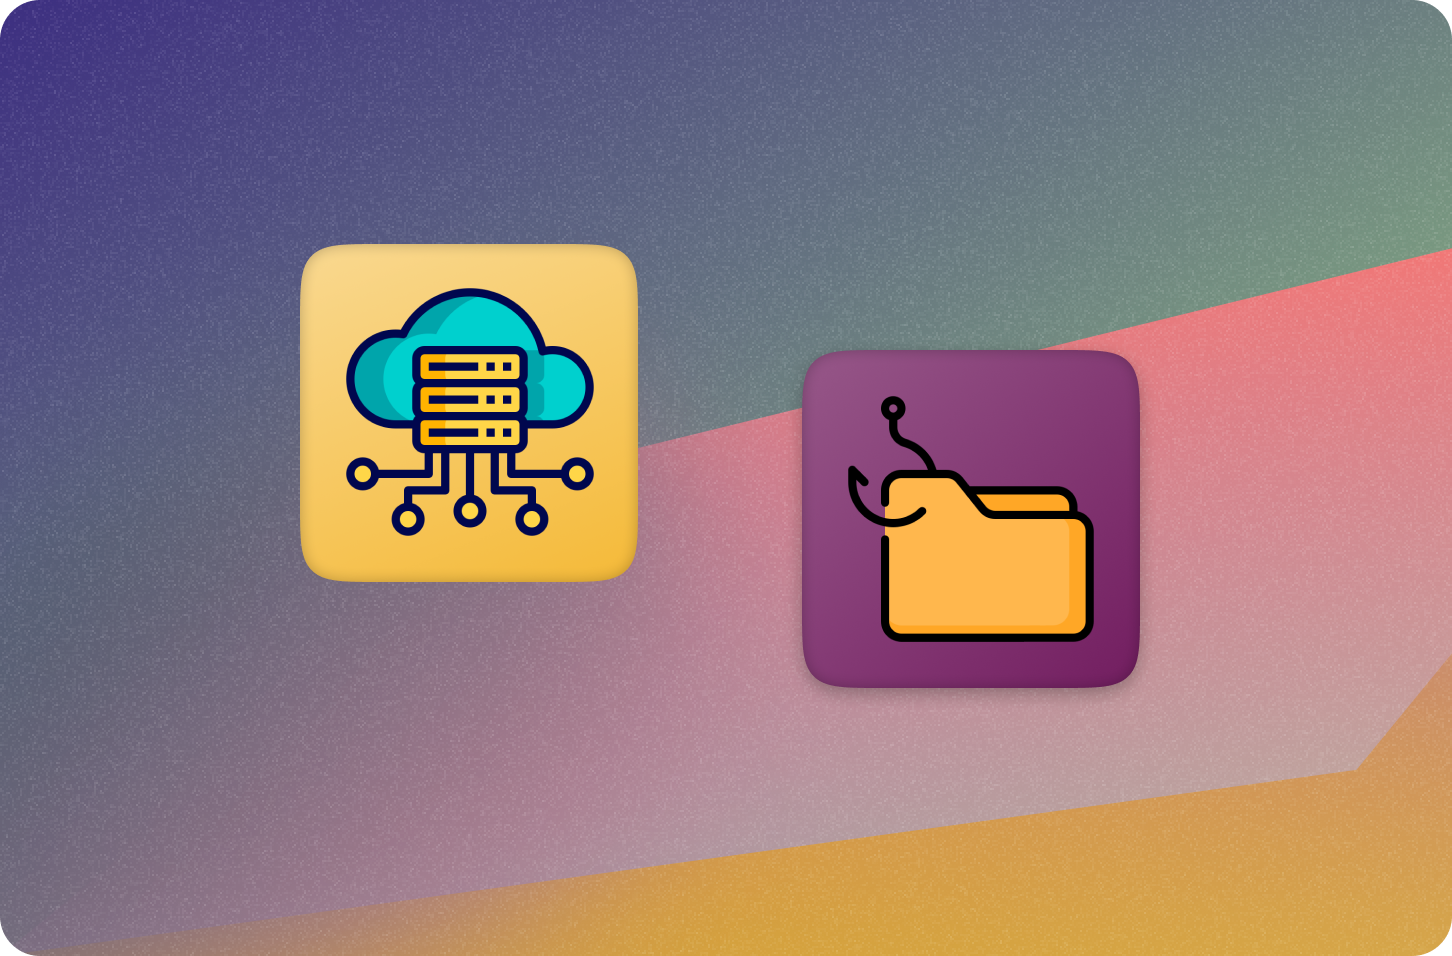 A distributed server on the left and a folder icon with a pirate's hook in it